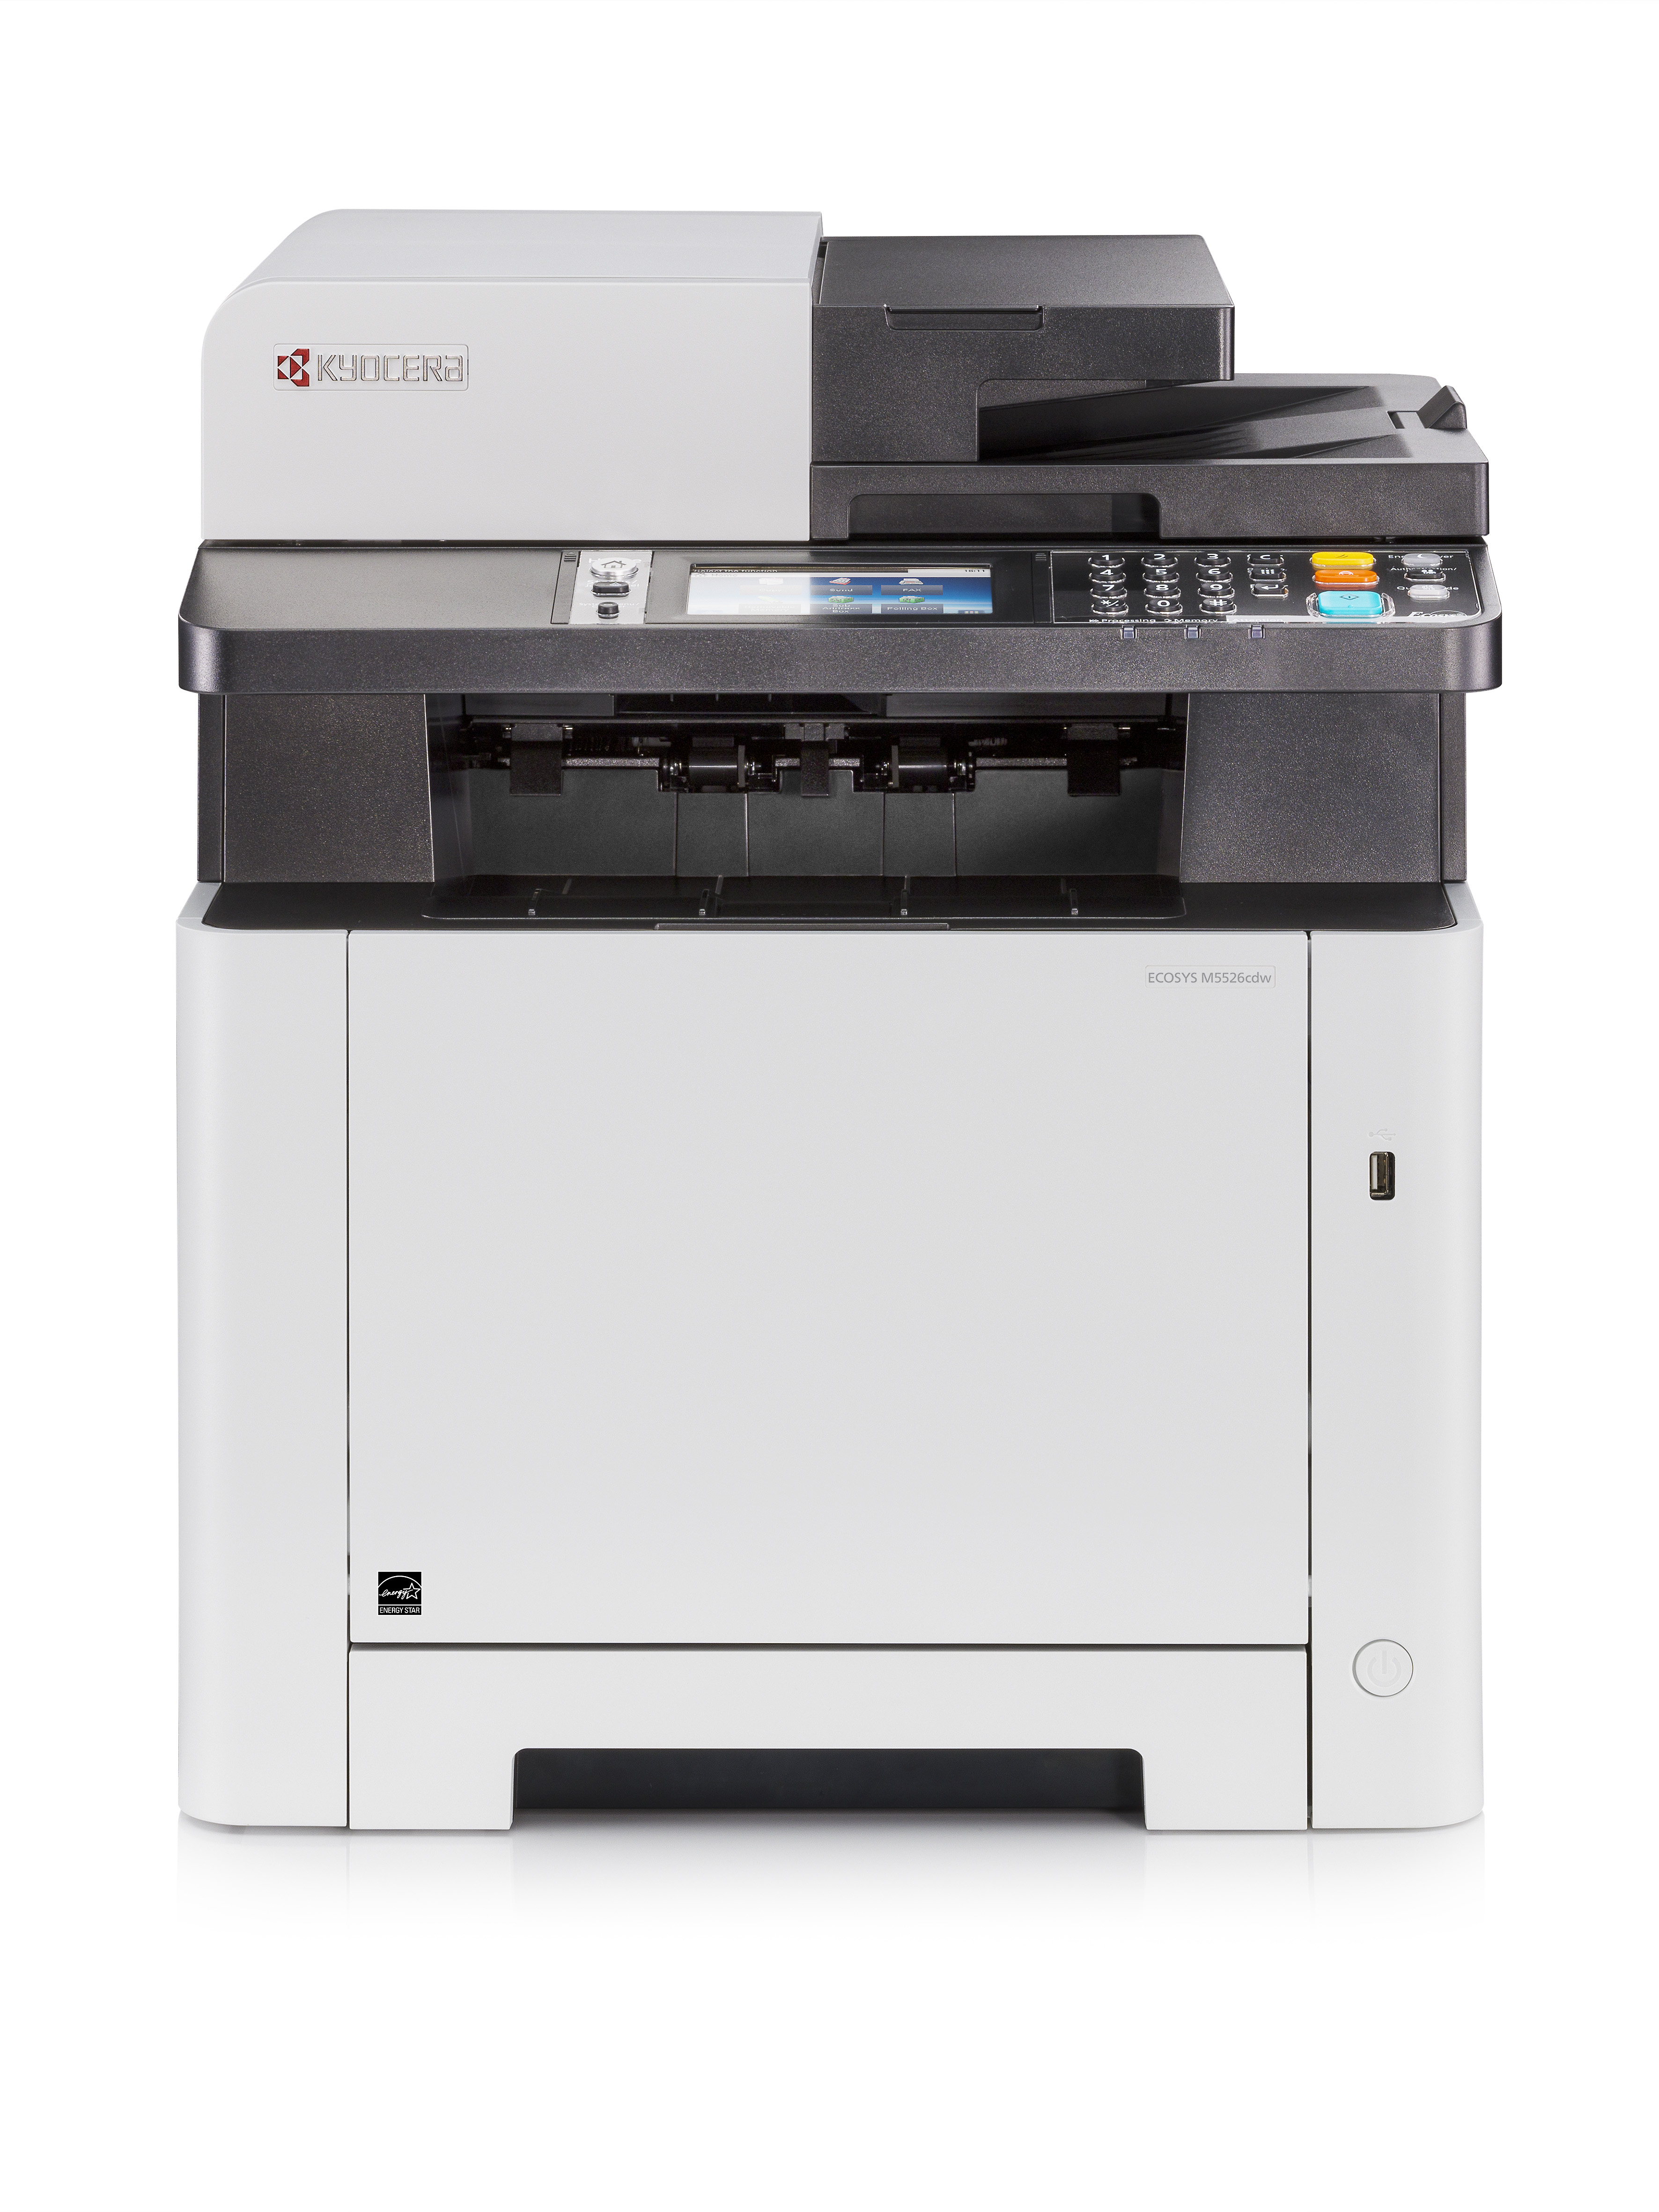 ECOSYS M5526CDW A4 26PPM COLOUR LASER MFP - PRINT/ SCAN/COPY/FAX/WLESS-2YR RTB WT image